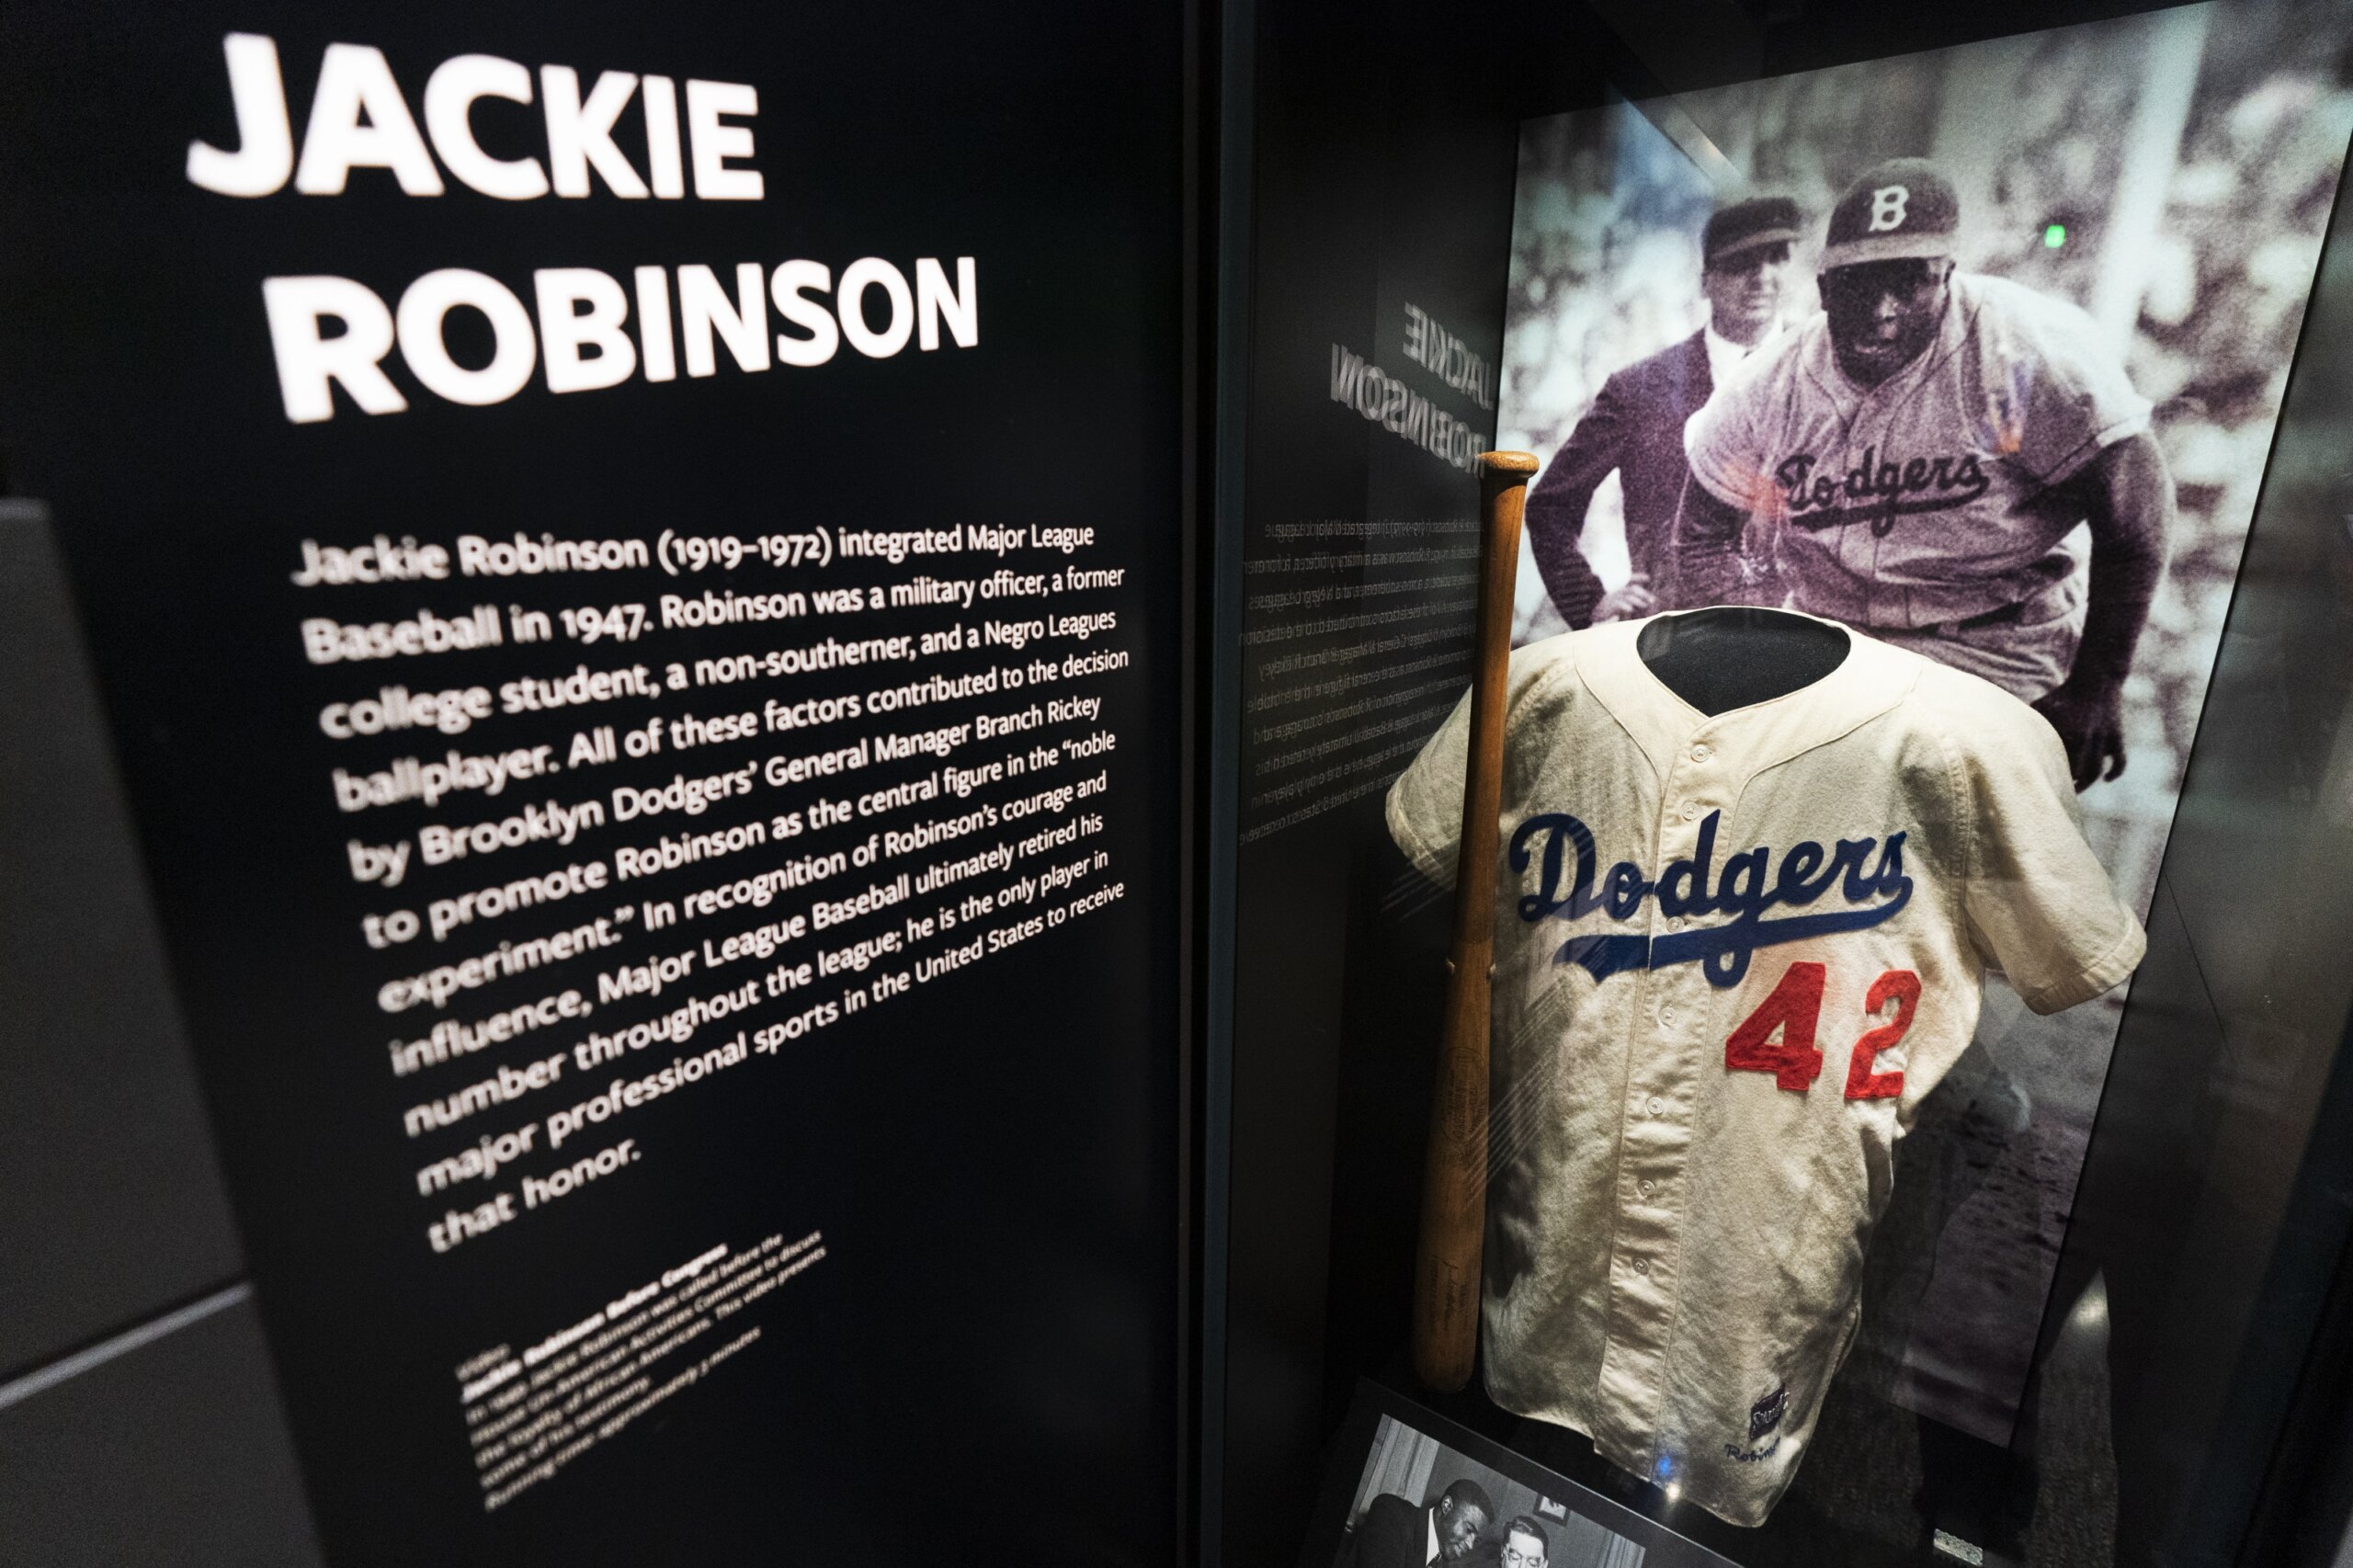 A fan puts on a give-away Jackie Robinson jersey with No. 42 on